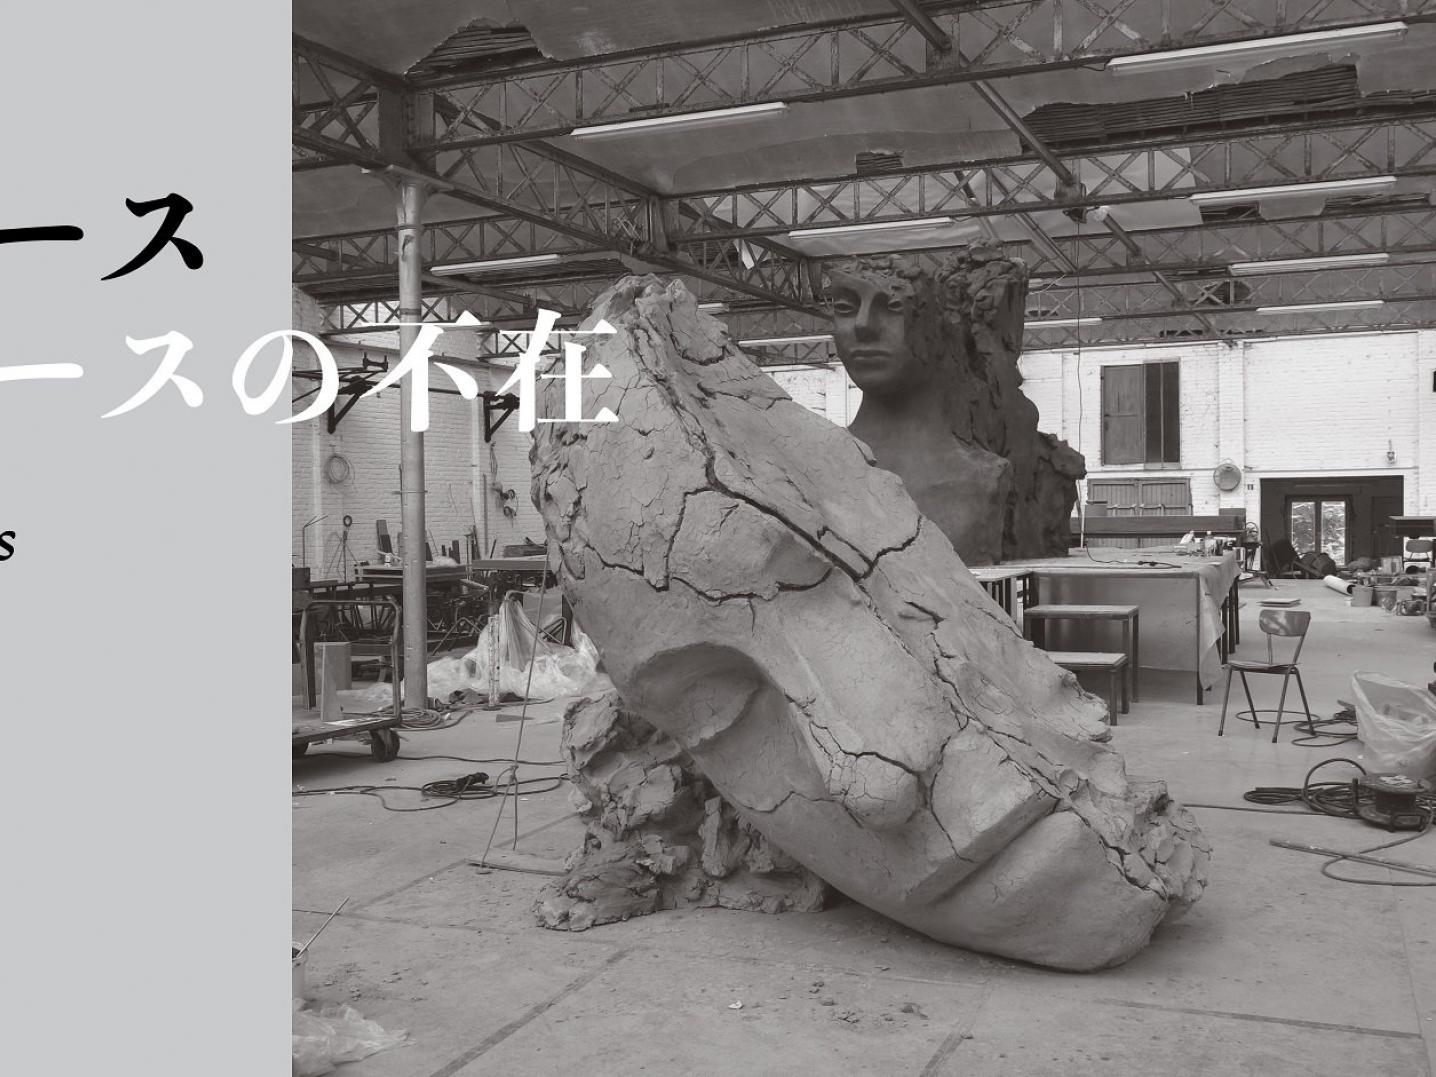 Banner Mark Manders exhibition at Museum of Contemporary Art Tokyo